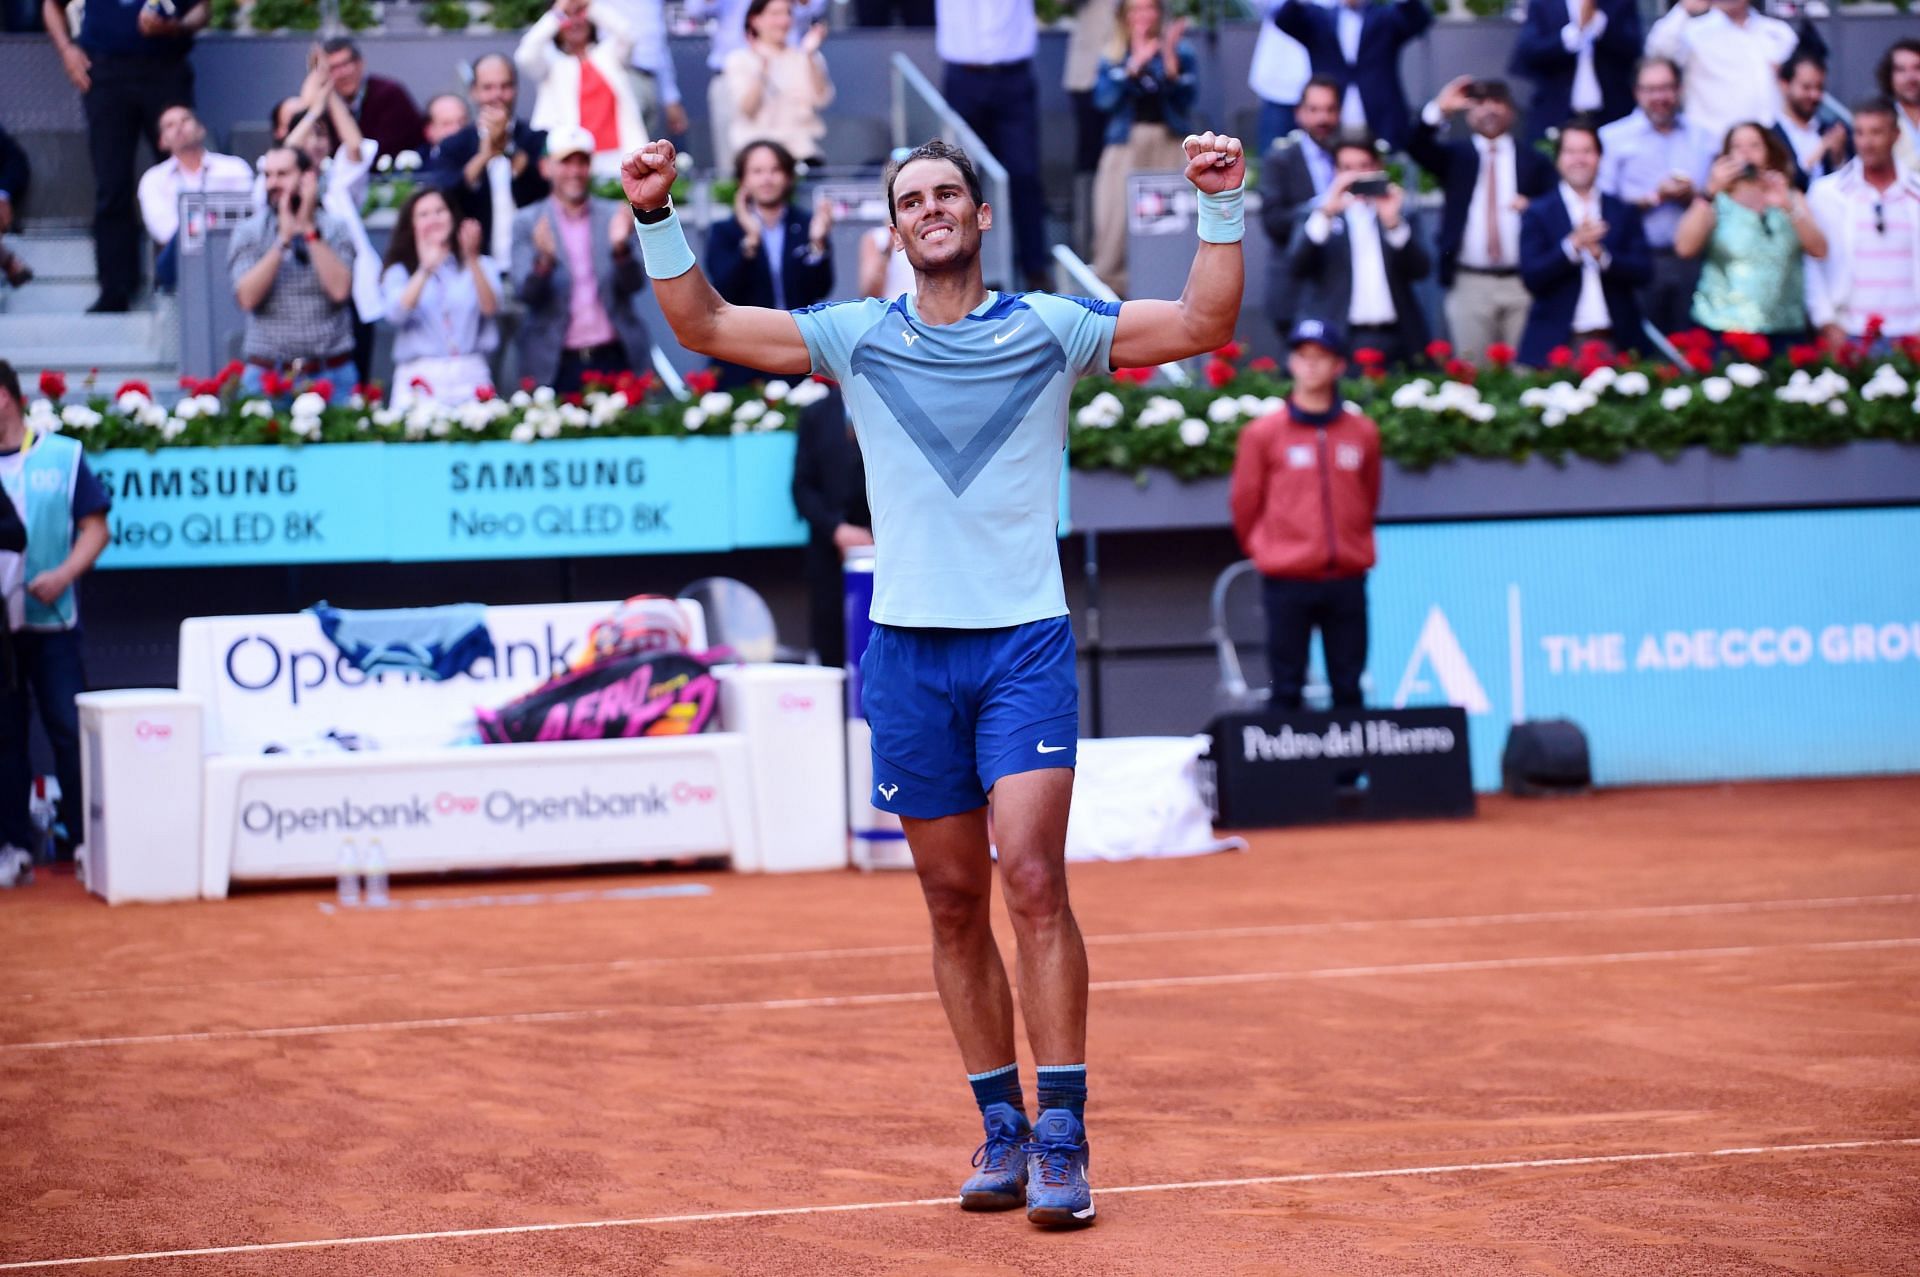 Rafael Nadal has reached the quarterfinals of the Mutua Madrid Open